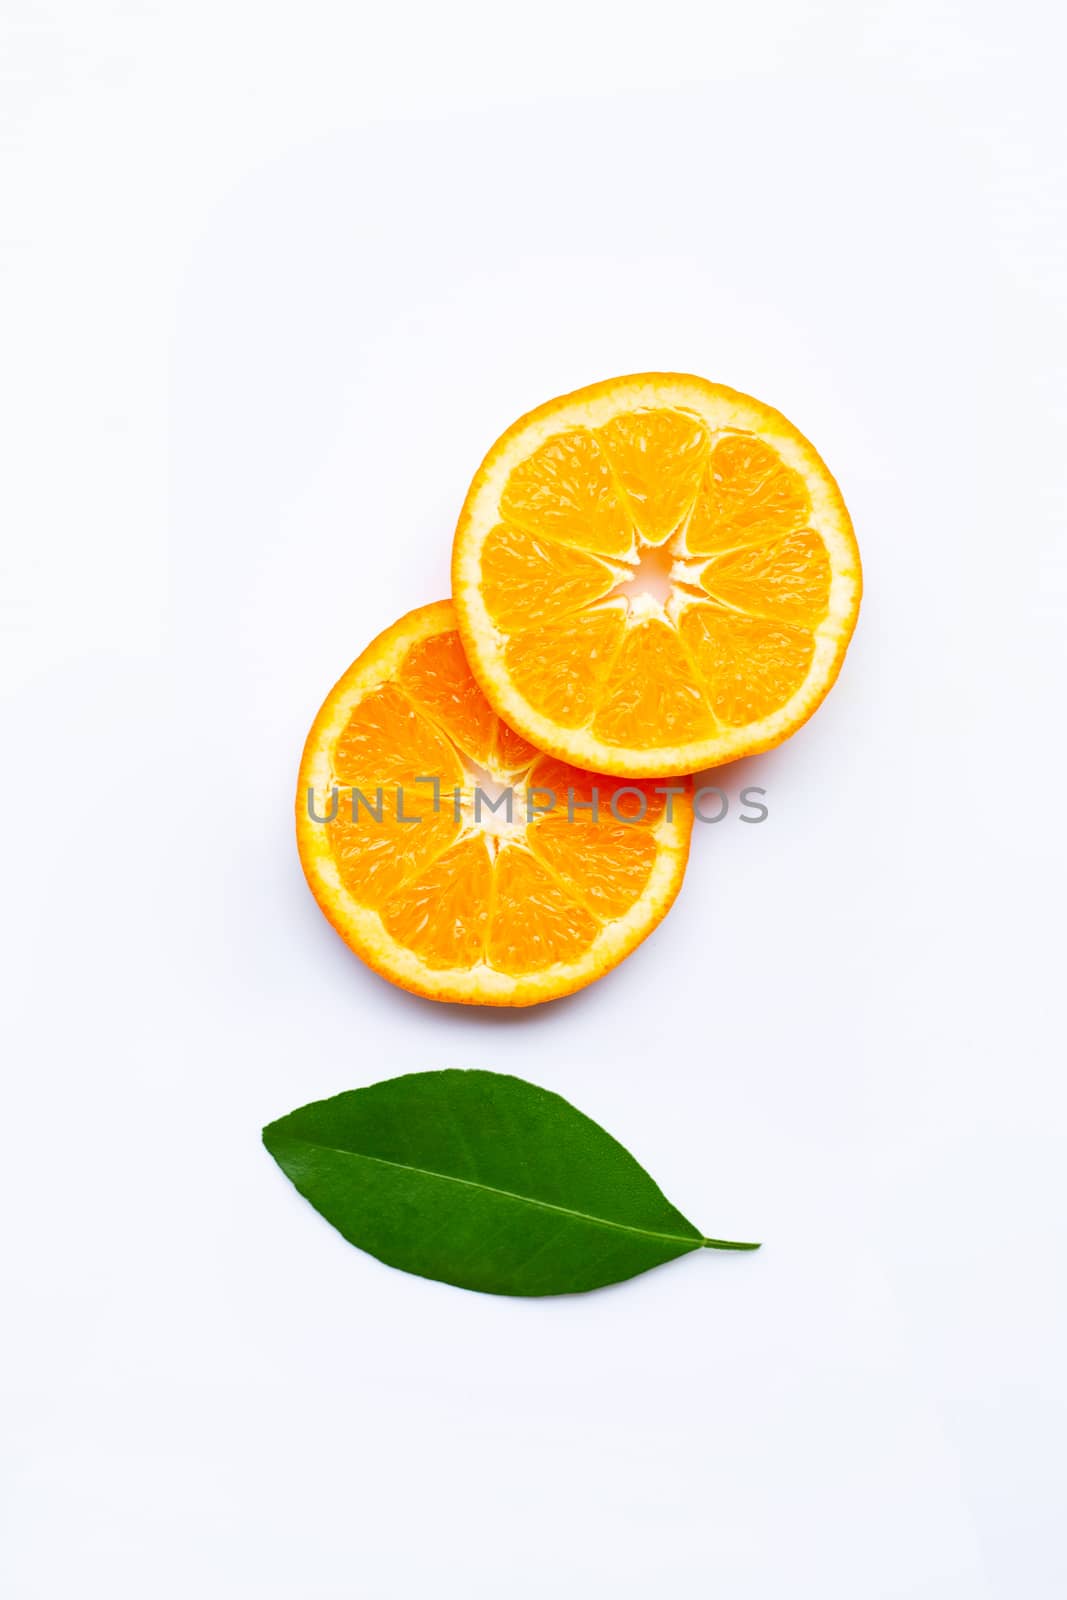 Fresh orange citrus fruit with leave on white background.  Top view